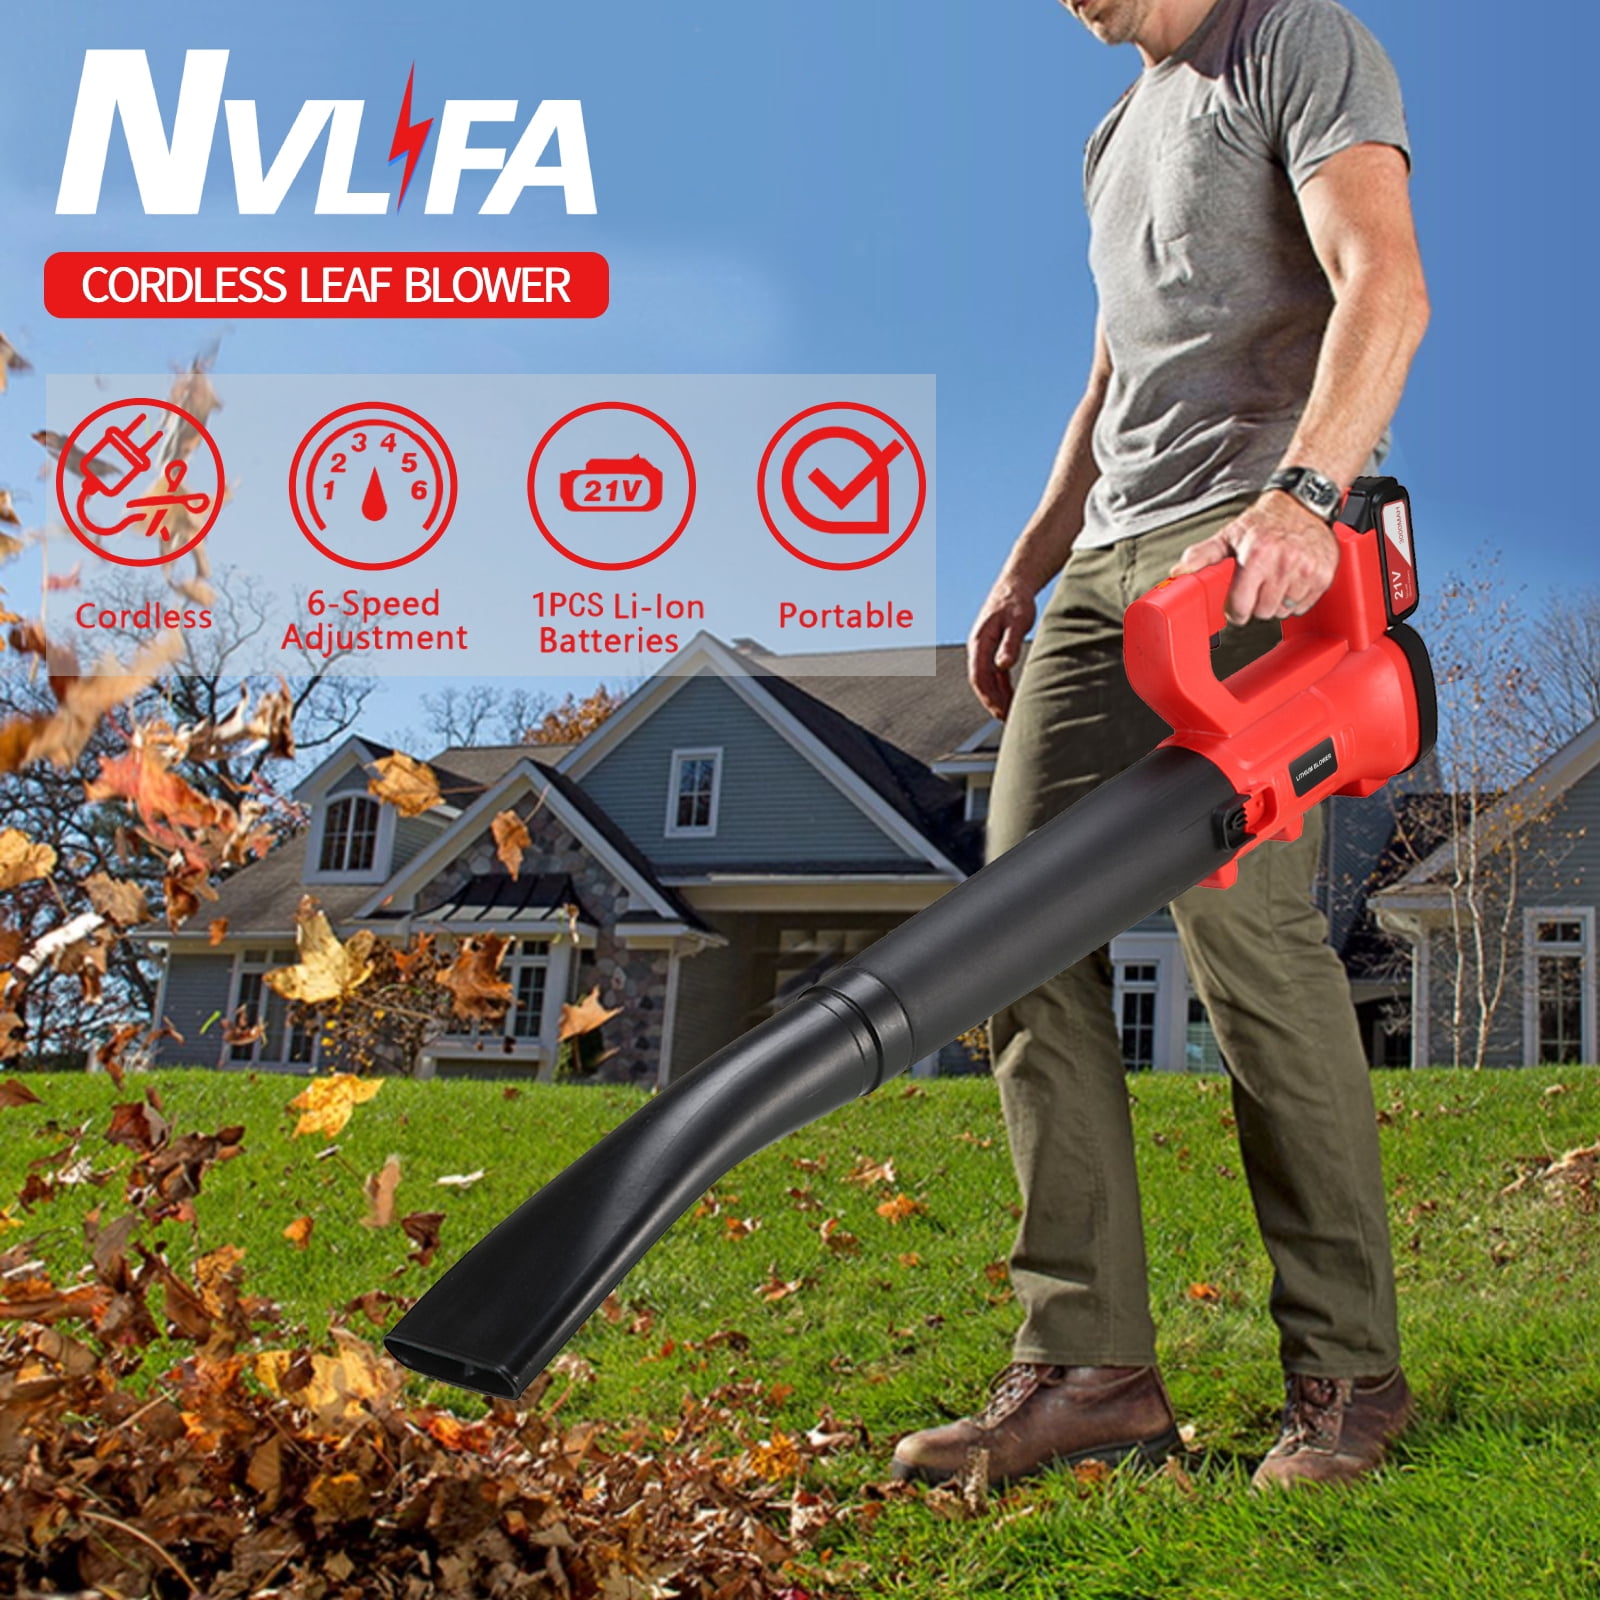 Best Partner Turbine Powerful Leaf Blower 2-Speed Control with 120MPH and 465 CFM Output Ergonomic Handle Design 